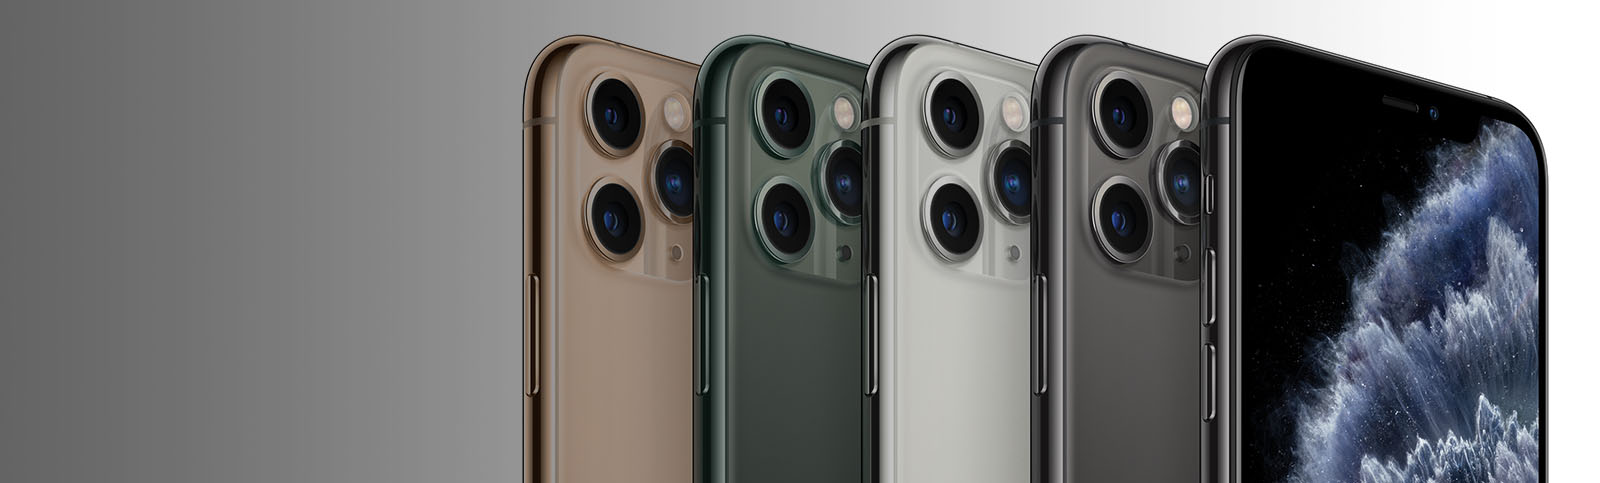 AT&amp;T | New Apple Products Including iPhone 11 for Pre-Order Sept 13